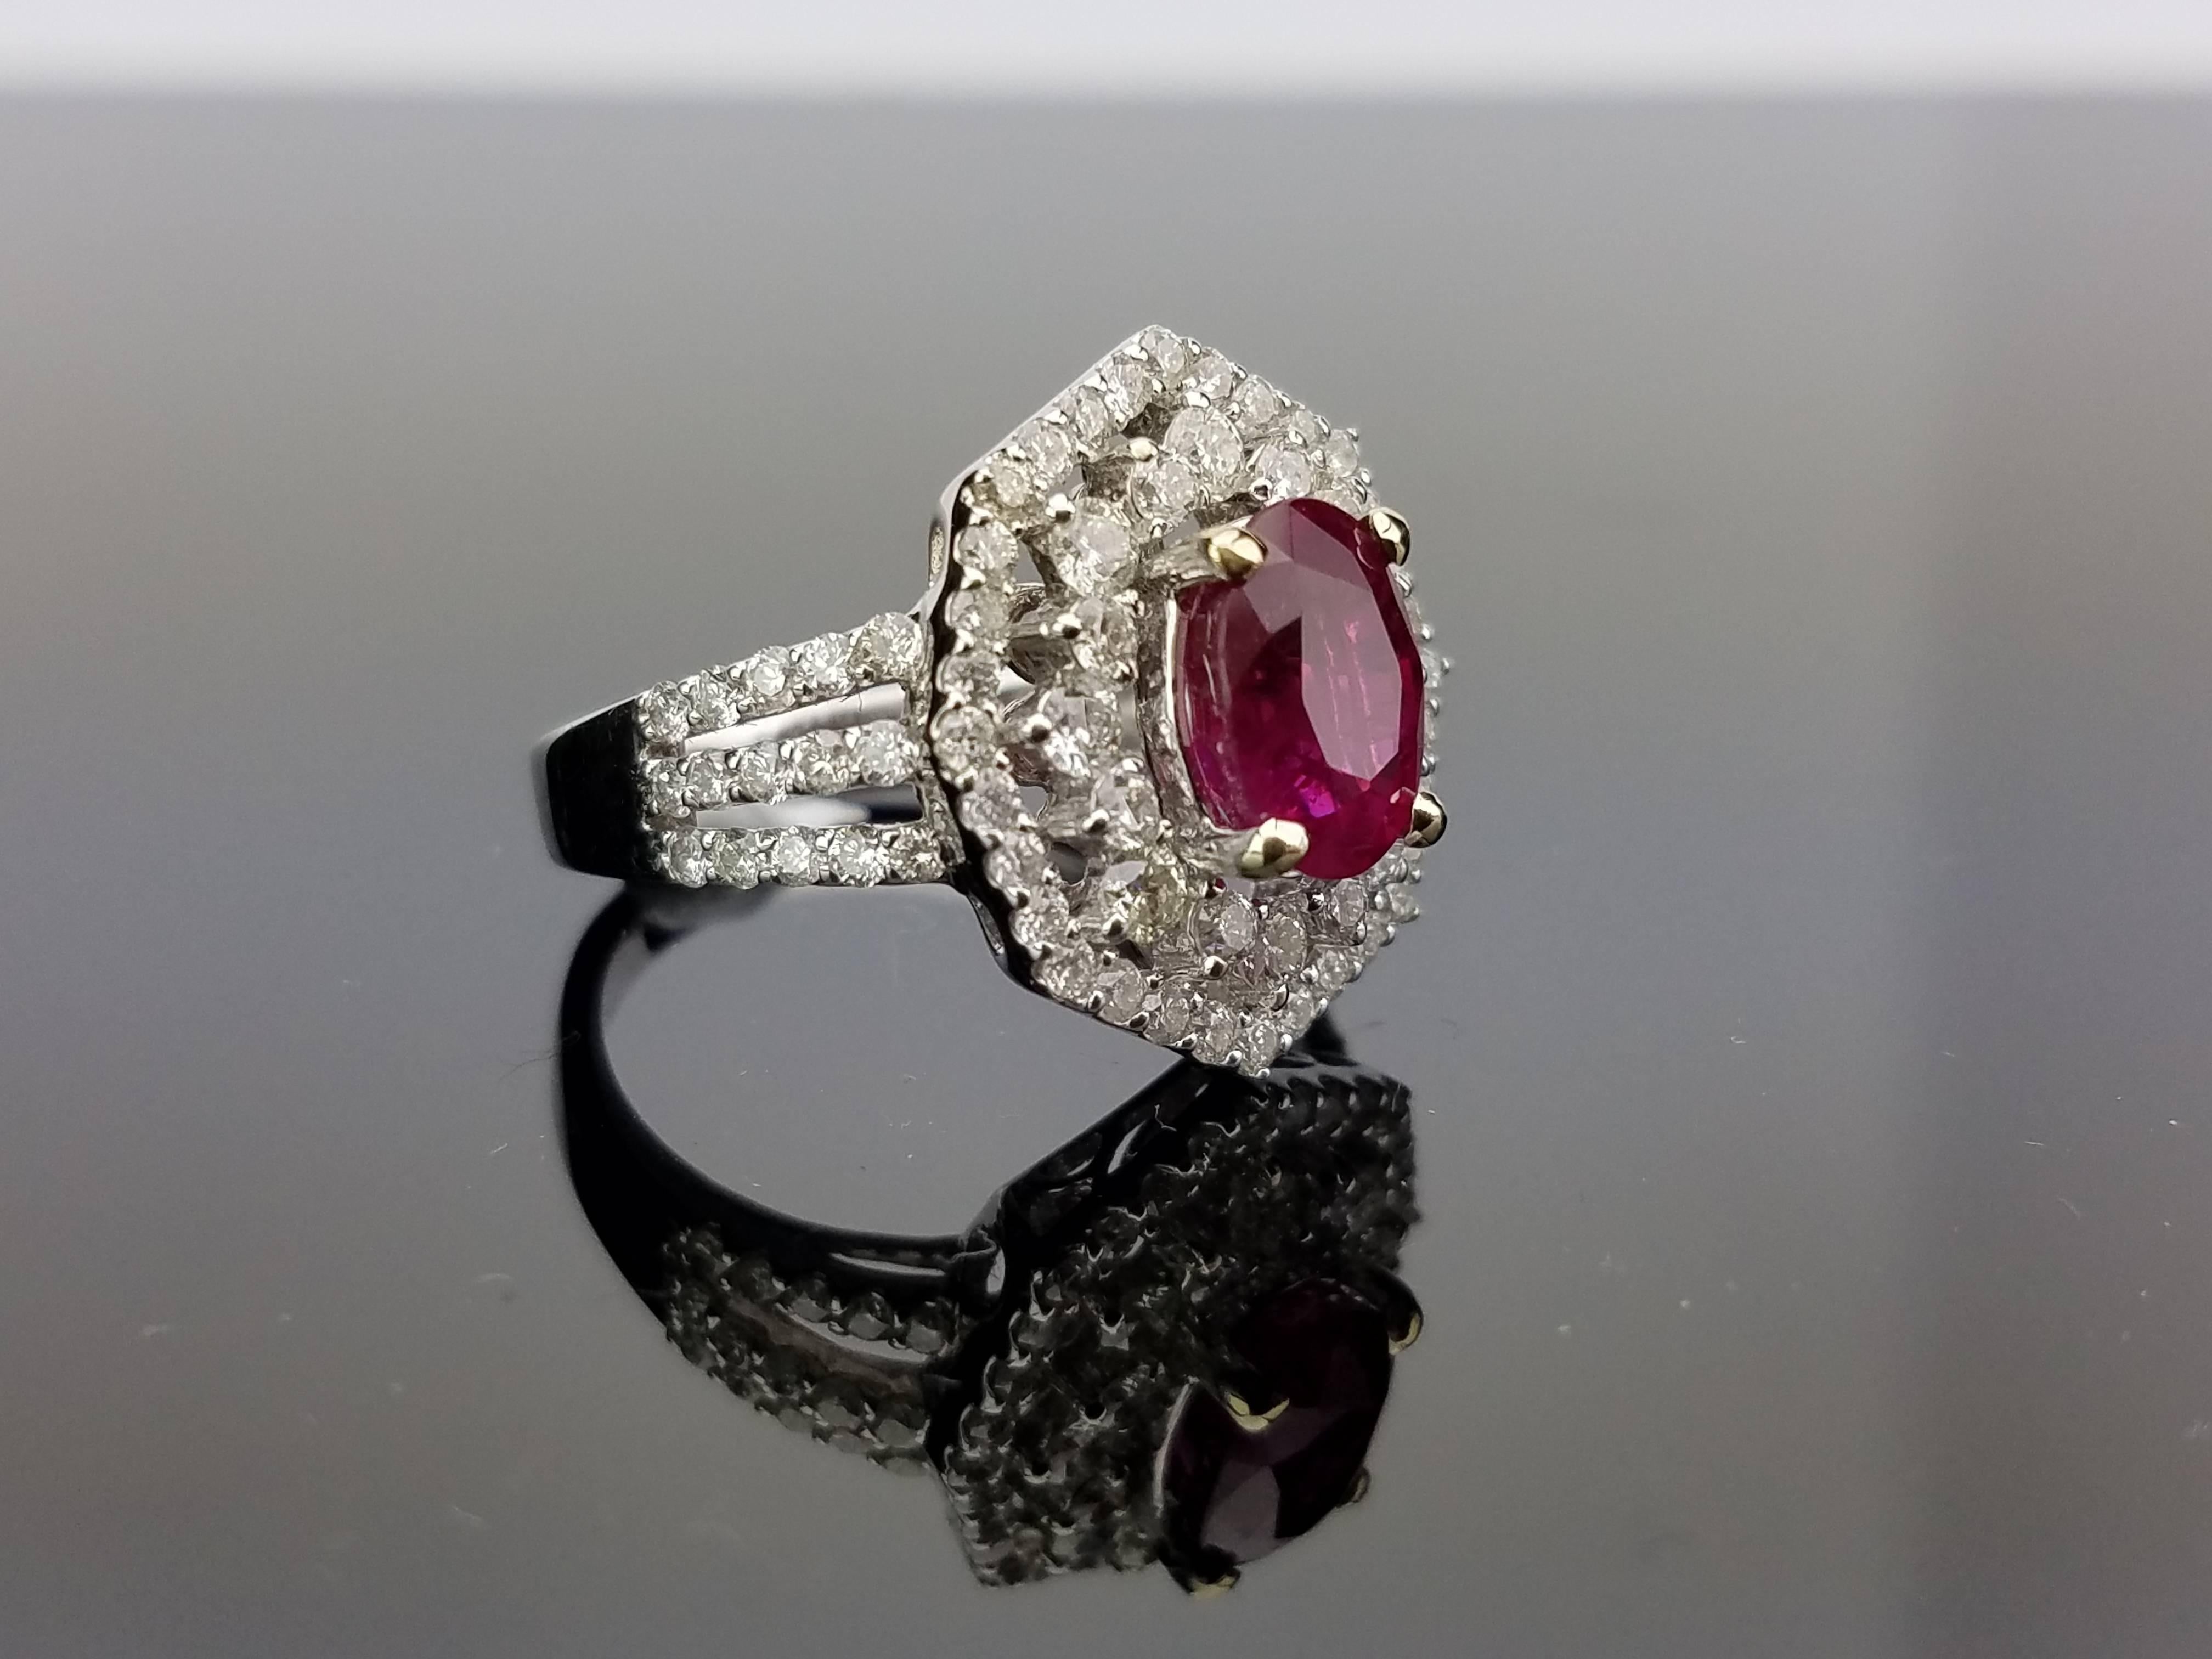 Mozambican Ruby Ring surrounded with Brilliant Cut 2 tier Diamond Cluster on 18K White Gold hoop

Center Stone Details: 
Stone: Mozambique Ruby (heat)
Cut: Oval
Weight: 2.42 carat

Diamond Details: 
Cut: Brilliant (round)
Total Carat Weight: 1.4